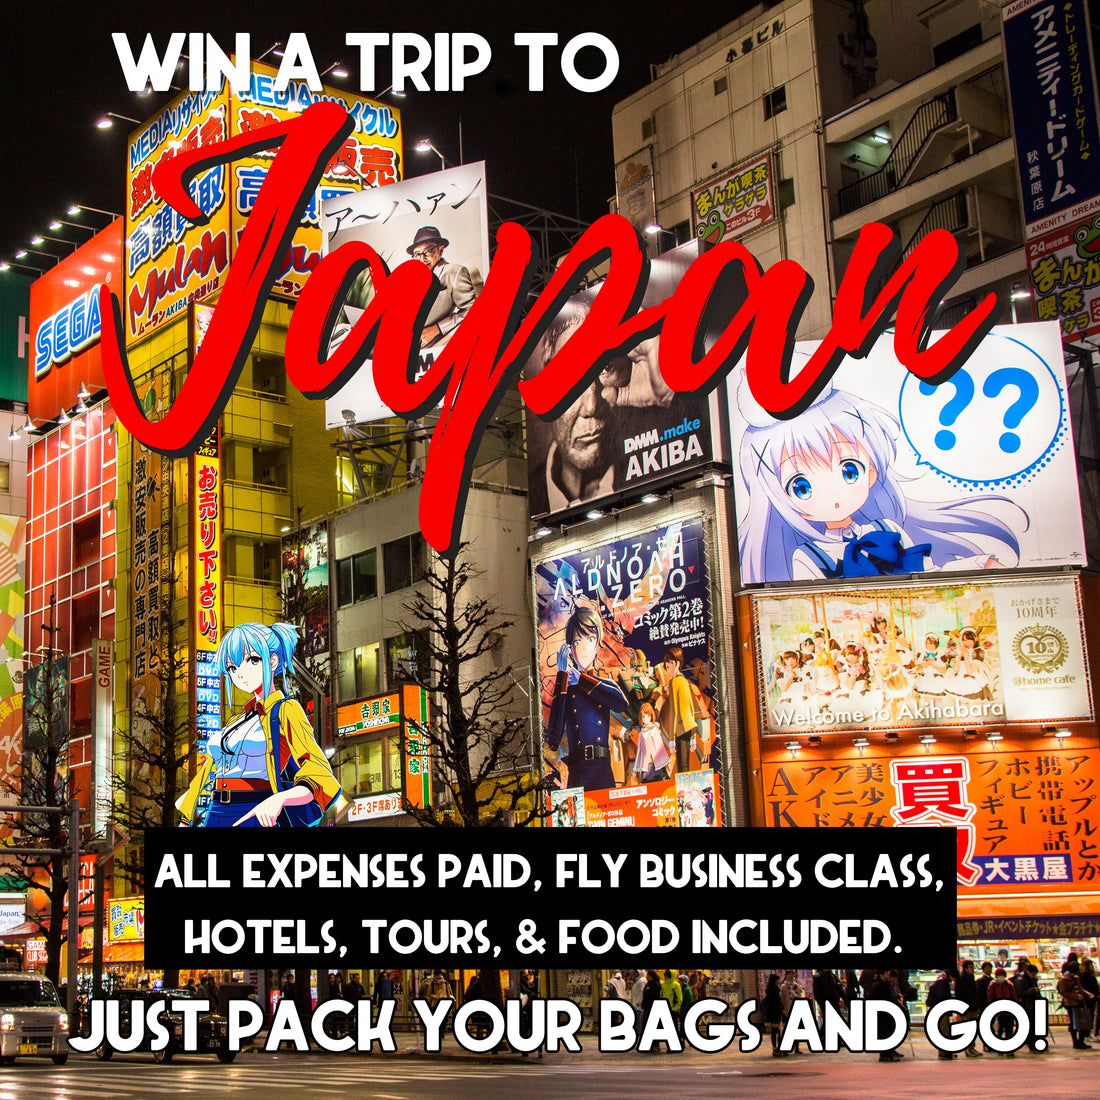 WIN A TRIP TO JAPAN!